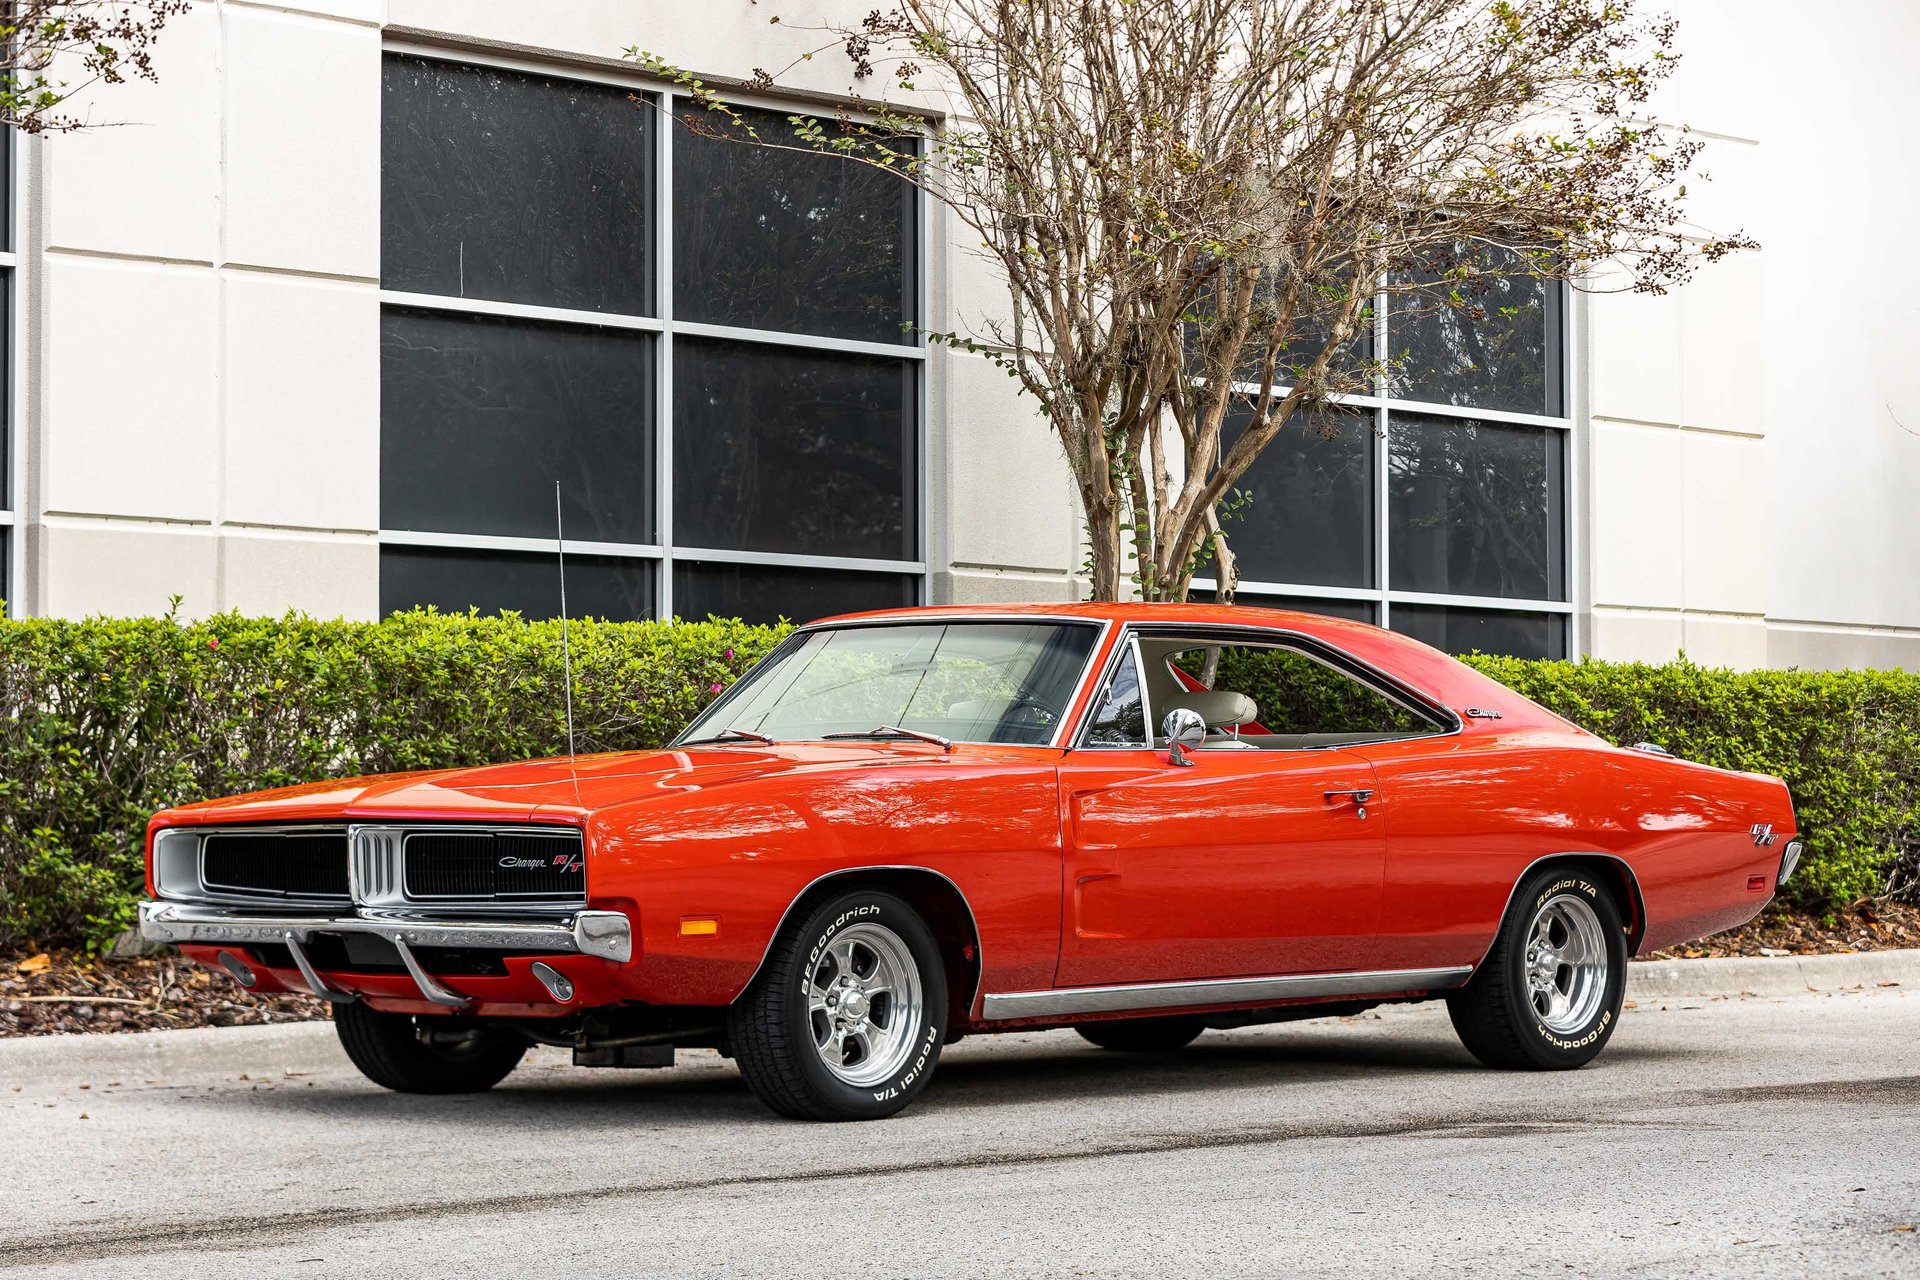 1969 Dodge Charger | Orlando Classic Cars